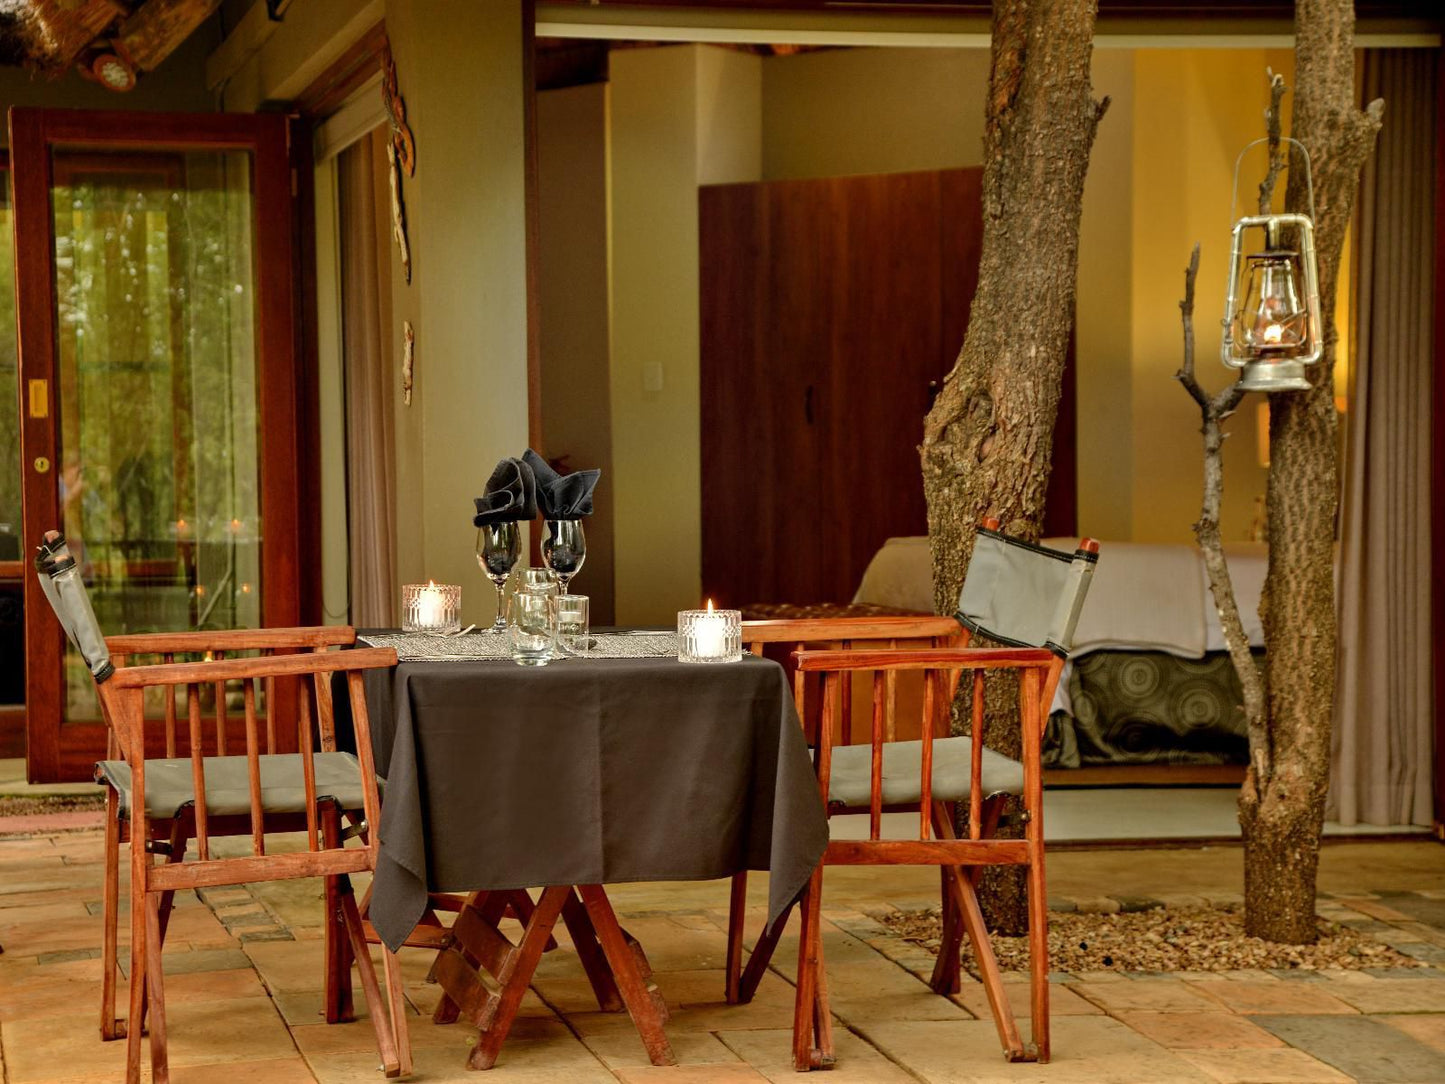 Tambuti Lodge Pilanesberg Pilanesberg Game Reserve North West Province South Africa Colorful, Place Cover, Food